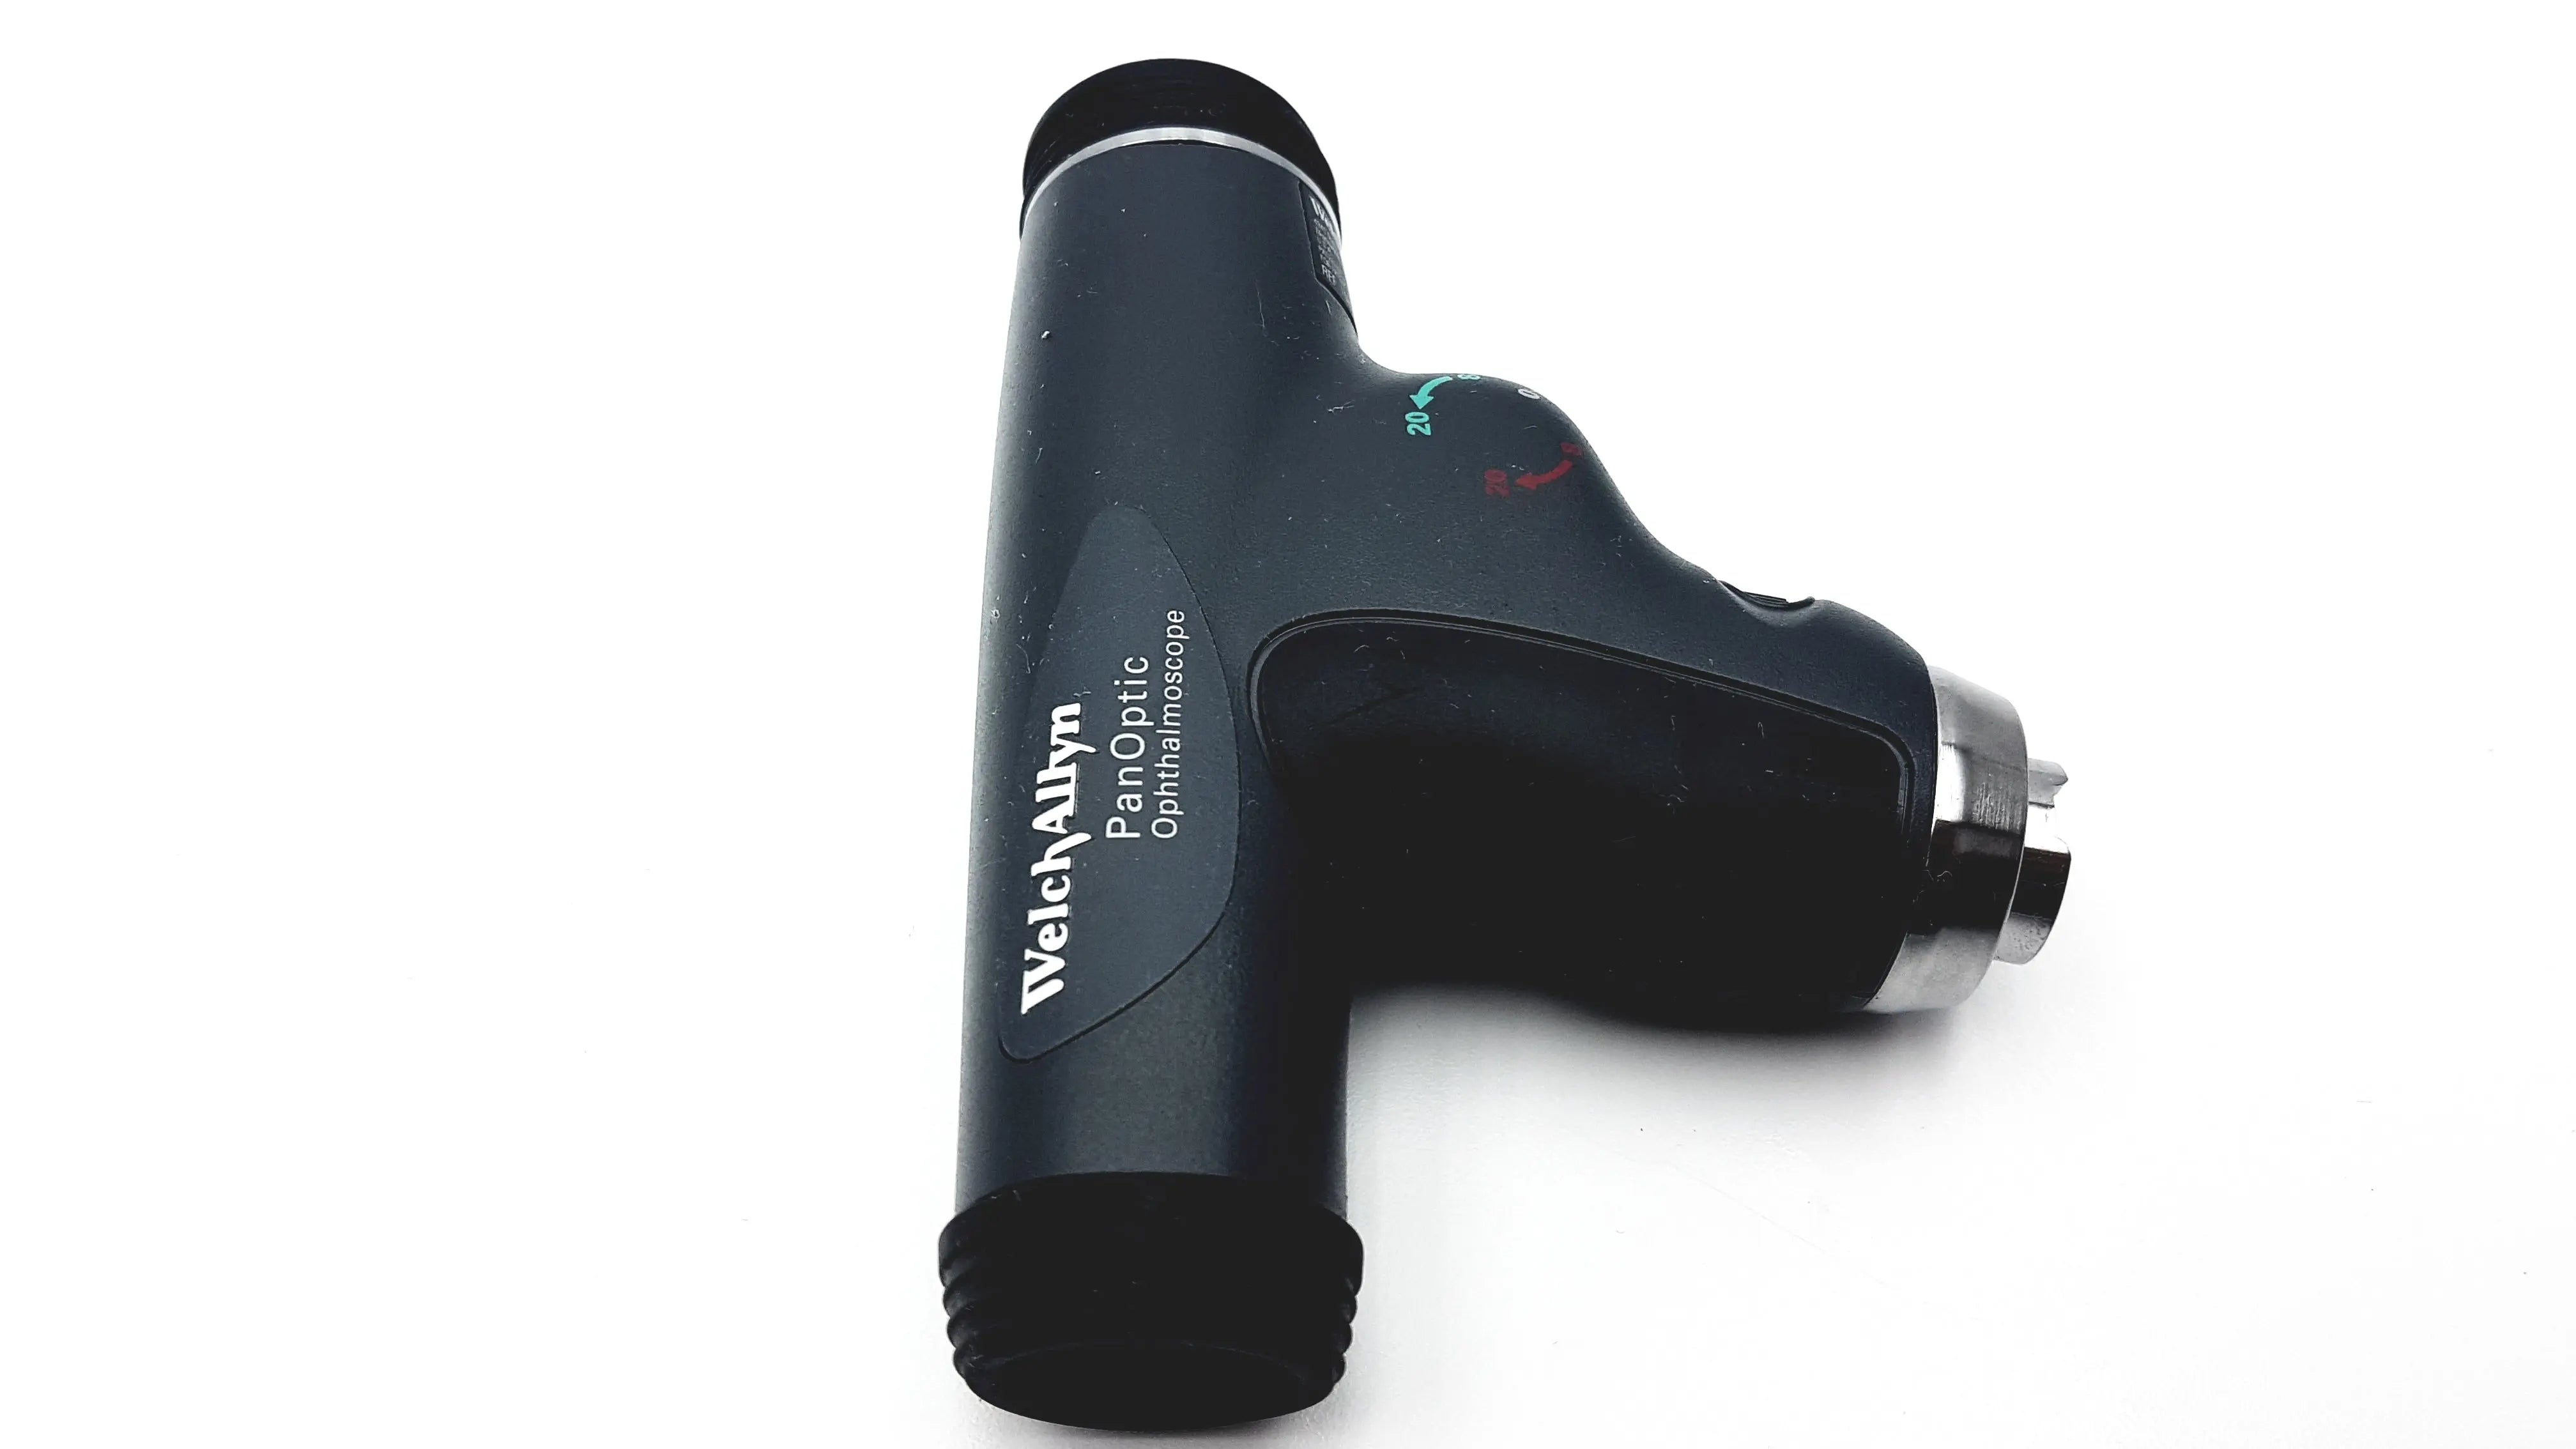 Load image into Gallery viewer, A Biomedical Service Welch Allyn PanOptic Ophthalmoscope 11820 290.00